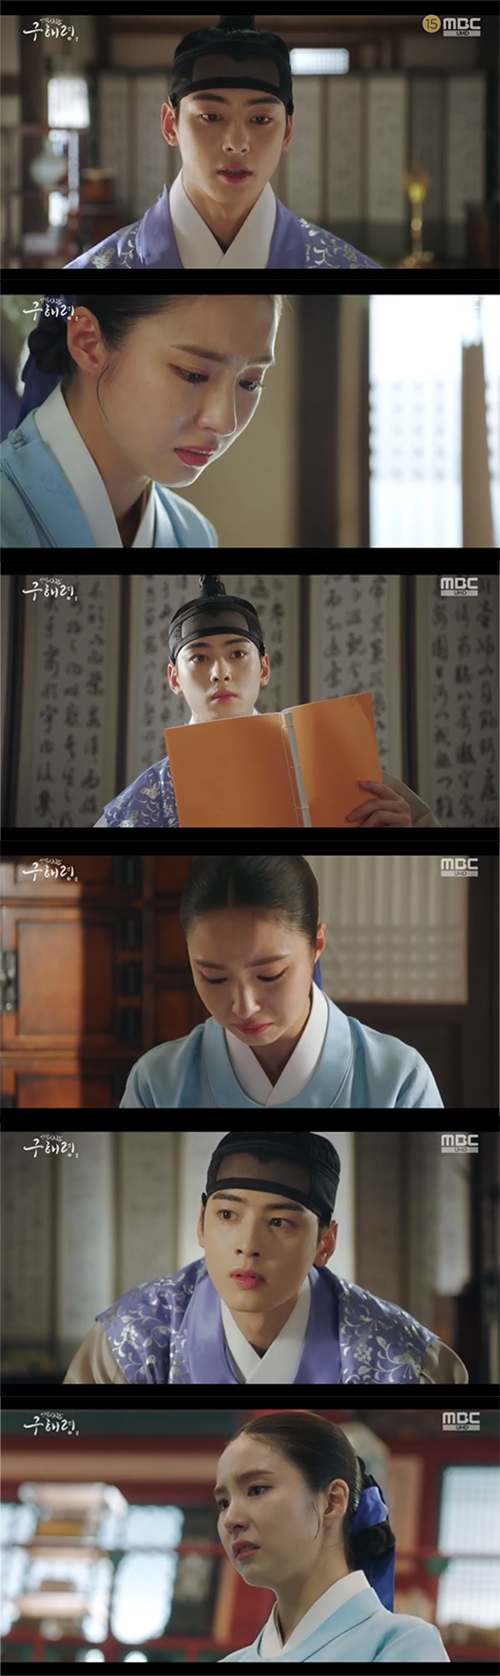 Na Hae-ryung, the new officer, warmly comforted Shin Se-kyung, who had suffered the ordeal.In the MBC drama Na Hae-ryung, which was broadcast on the afternoon of the 31st, the former Na Hae-ryung (Shin Se-kyung), who became a lieutenant, was shown to know that Lee Lim (Jung Eun-woo) was actually a Sejo of Joseon.Irim, who was following Najang, who was supposed to be the perpetrator, was threatened with a knife by Najang. I am the prince of Joseon in this country, Sejo of Joseon.I can really ring me. Just in time, Na Hae-ryung happened to see this and found out the real identity of Irim.Later, Na Hae-ryung entered the melt-down party, and Irim also received information that Ada Lovelace would come.I dont know if youre cheating on Nangja, but you shouldnt cheat on the officer; just stop by, Irim said in a statement by Heo Sam-bo (the Holy Land) to hide himself.Its a Sejo of Joseon, said Lee Rim, who faced Na Hae-ryung, who introduced himself. I wished it wasnt, he said smallly.Na Hae-ryung told Lee, I have had a lot of opportunities in the meantime, but now what do you want to say?Or do you have something you want to hear from me, I am sorry that I did not know that it was Sejo of Joseon Mama, he said sharply.Lee said, I wanted to say thank you.I do not know why you were there last night, but I wanted to thank you for saving me.  This time I lied to you, so I do not have to apologize. I thought maybe I could be friends, said Koo, and I wished I had one of them who could be on the side of this great palace.Why did not you say it before? The next day, Irim expected to meet Na Hae-ryung when Ada Lovelace came.But Oh Eun-im (Lee Ye-rim) came instead, and Koo Na Hae-ryung went to Lee Jin (Park Ki-woong).Lee Jin led Na Hae-ryung to shoot Lee Rim and bow.Lee Jin aimed at the target while Irim put his bow on the wrong ground.When Na Hae-ryung laughed, Irim said, Do you know how difficult it is to shoot a bow? Do not be sneer and do it yourself.Na Hae-ryung sneered at the provocation of Irim, who confessed that he had learned to bow as a child.Since then, the day has come when Ada Lovelace, including Na Hae-ryung, receive a green belt.But Na Hae-ryung was late for the job and was not given a green bar because the warehouse was empty.Na Hae-ryung learned from his fellow officers that this was a mess.Na Hae-ryung appealed in an appeal that there was corruption in the payment of green salaries but the next day was largely chastised by a senior officer.The senior officer said, What kind of idiot raised this appeal?Na Hae-ryung shed tears and said, I want to know why I should be angry and I want to be angry. I just appealed to the manager to solve it because I had seen something unfair as a manager.Na Hae-ryung went to see Irim with tears. In a different way, Irim asked carefully, Whats going on?When Koo failed to answer and wept, Irim said, You can cry as much as you like, its a place where people dont find it, so no one hears it even if you cry out loud.After seeing Shin Se-kyung as a Sejo of Joseon, he began to show his favor by meeting with Sejo of Joseon.The two mens tit-for-tat chemistry gave a thrill to the beginning of the romance with warm words of comfort.It is expected that the two will work together to do justice.Photo  MBC Broadcasting Screen